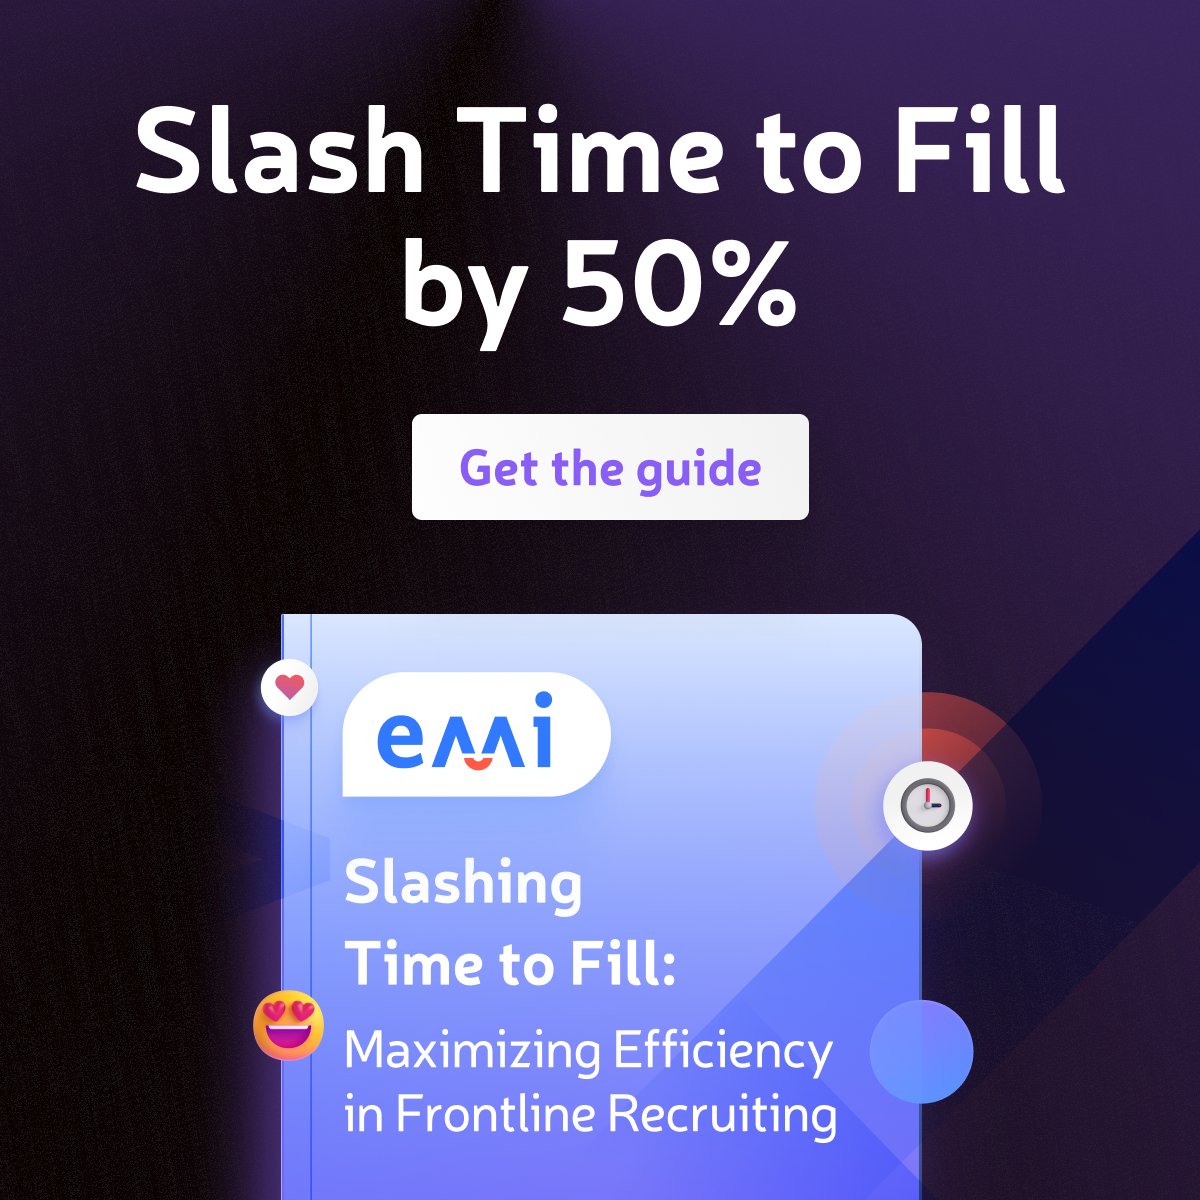 #RecruitingAutomation can transform your #hiring process, making it more efficient and effective with this great guide by @EmiLabsHQ  ecs.page.link/Kwi3T #TalentAcquisition #RecruitmentEfficiency #HighVolumeHiring #Emi #HRInnovation #RecruitersGuide